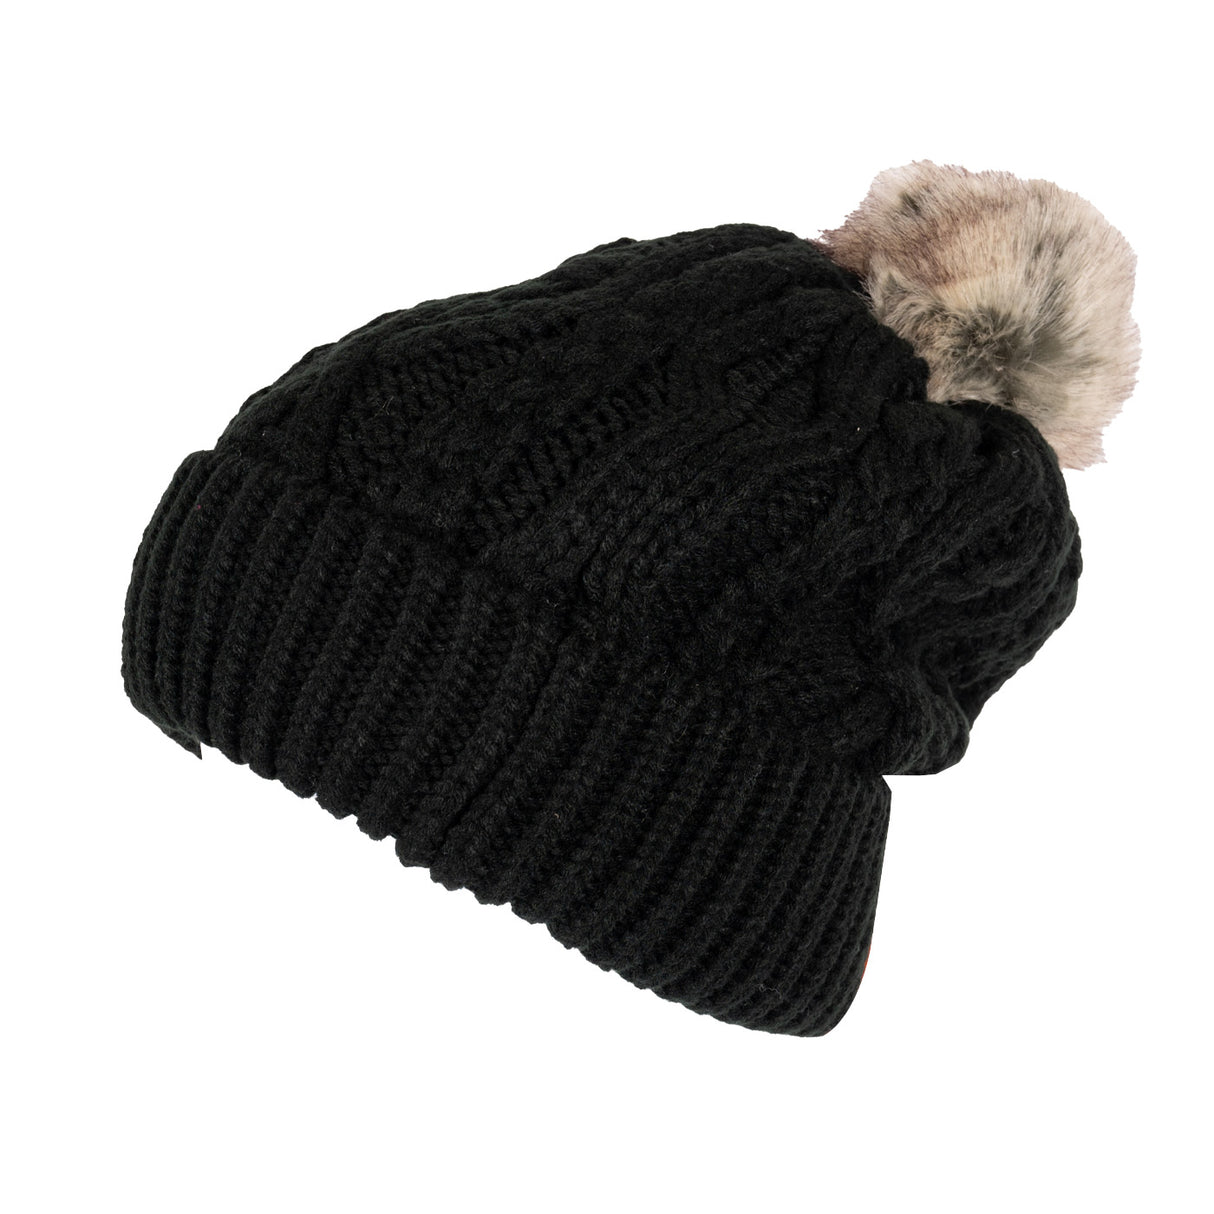 Heat Holders Brina Solid Cable Knit Roll Up Hat W/ Pom Pom